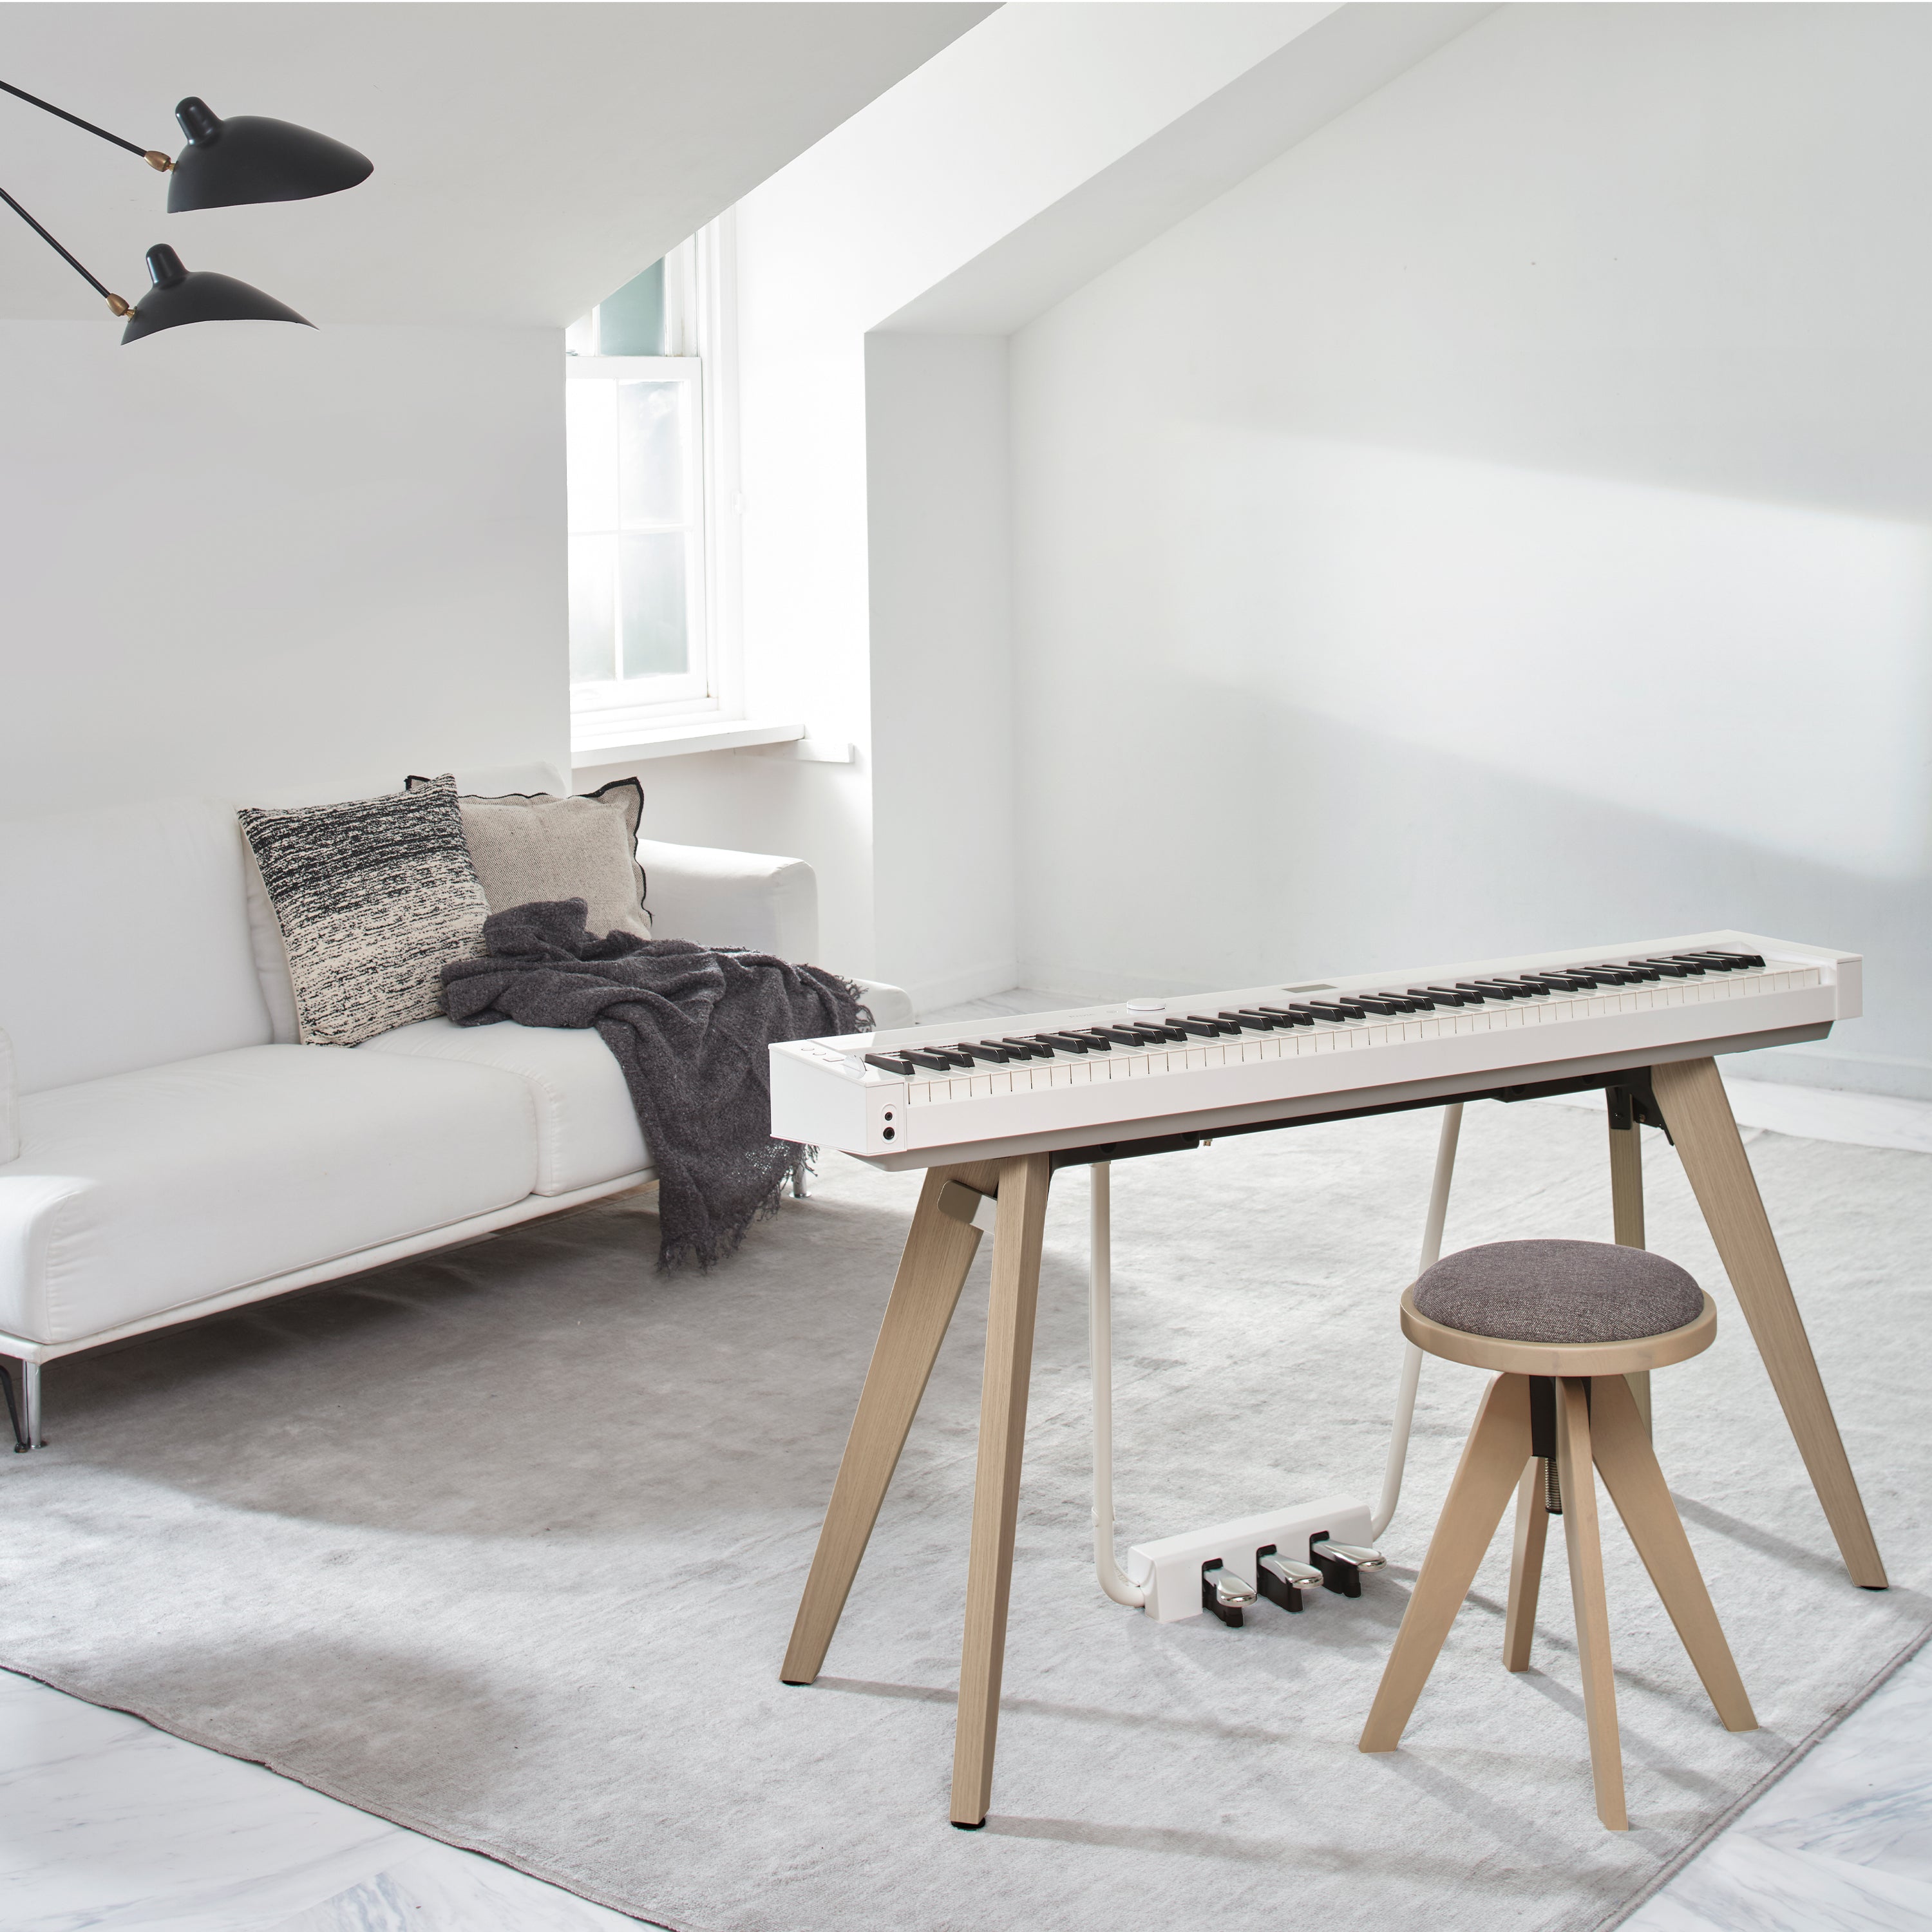 A white Casio PX-S7000 digital piano in a stylish living room